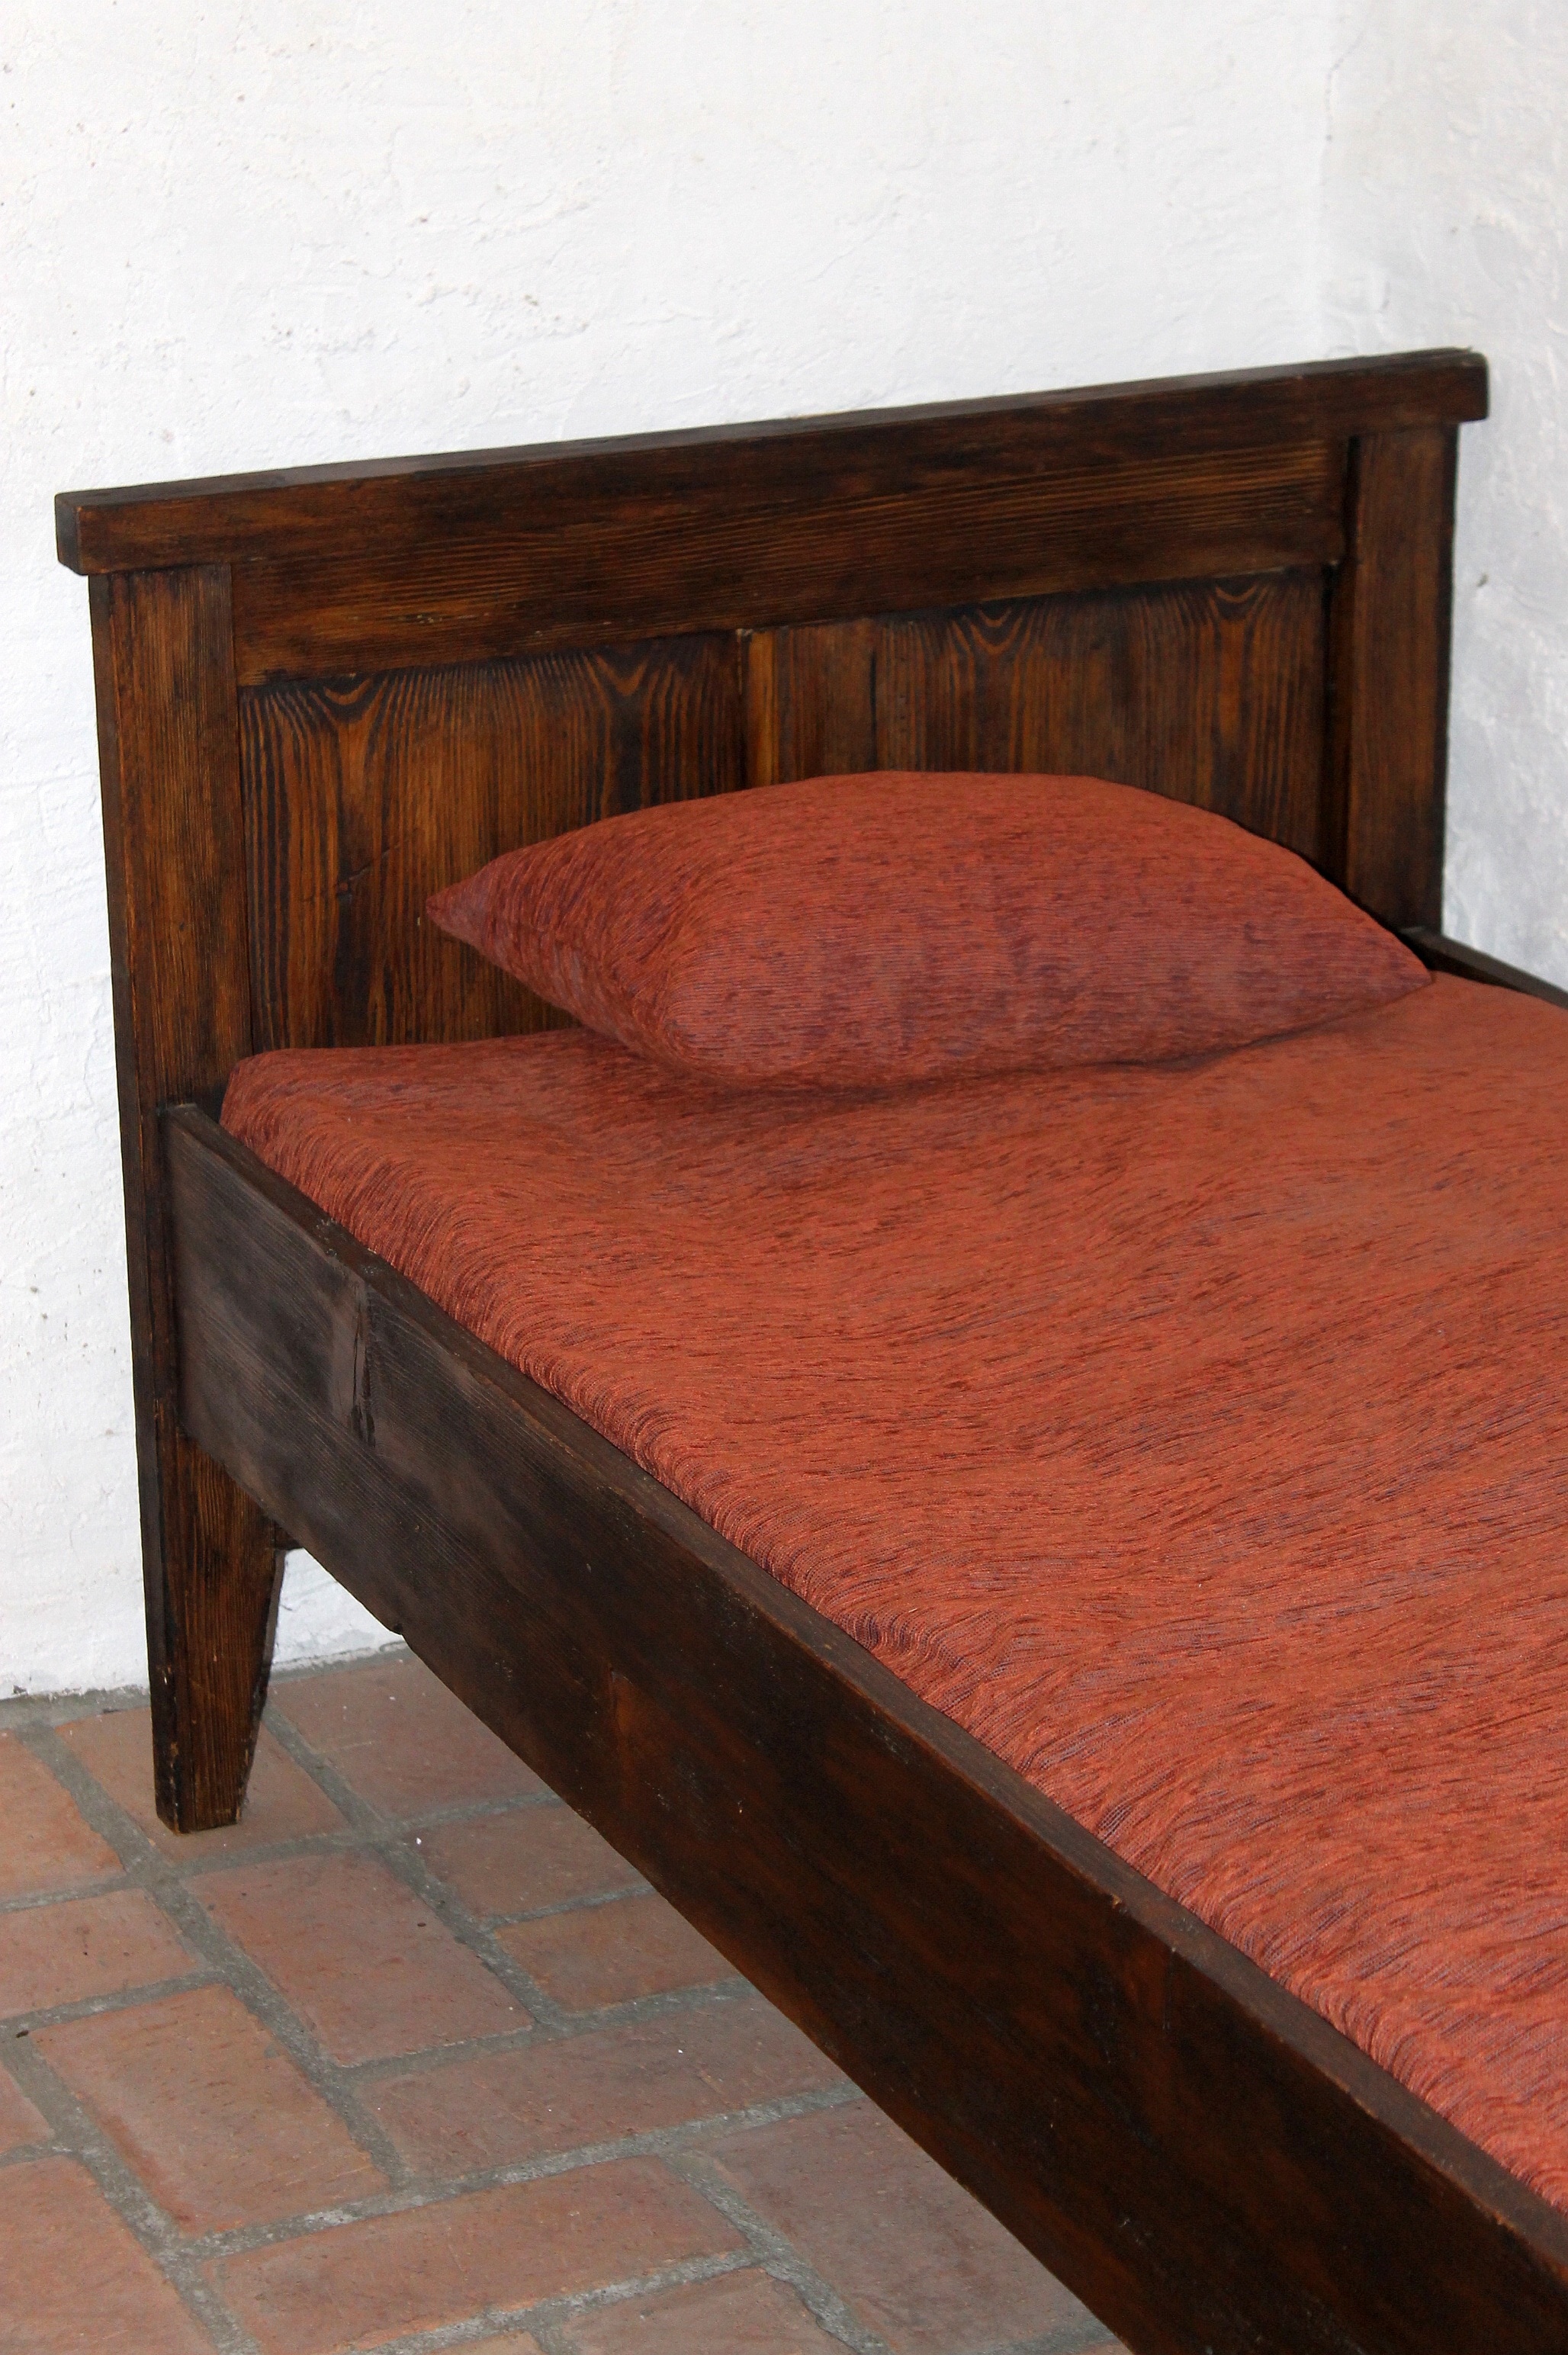 brown wooden bed frame with red fabric padded bed mattrsss